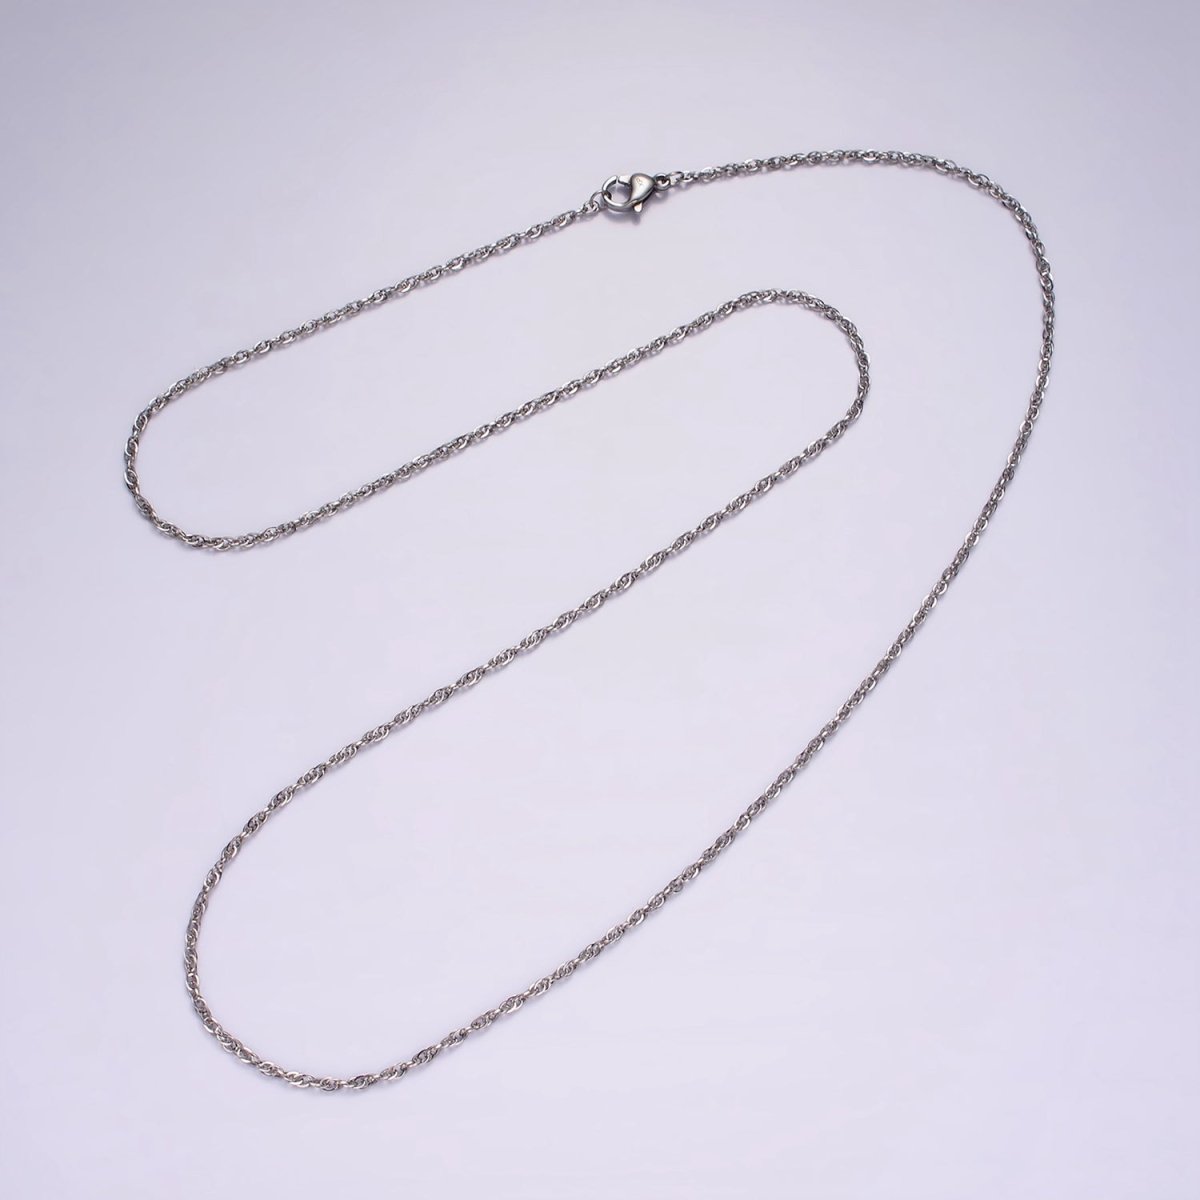 Stainless Steel Espiga Wheat Chain - Beautifully Unique - Double Cable Chain Necklace 23.6 inch | WA-2363 WA-2406 - DLUXCA